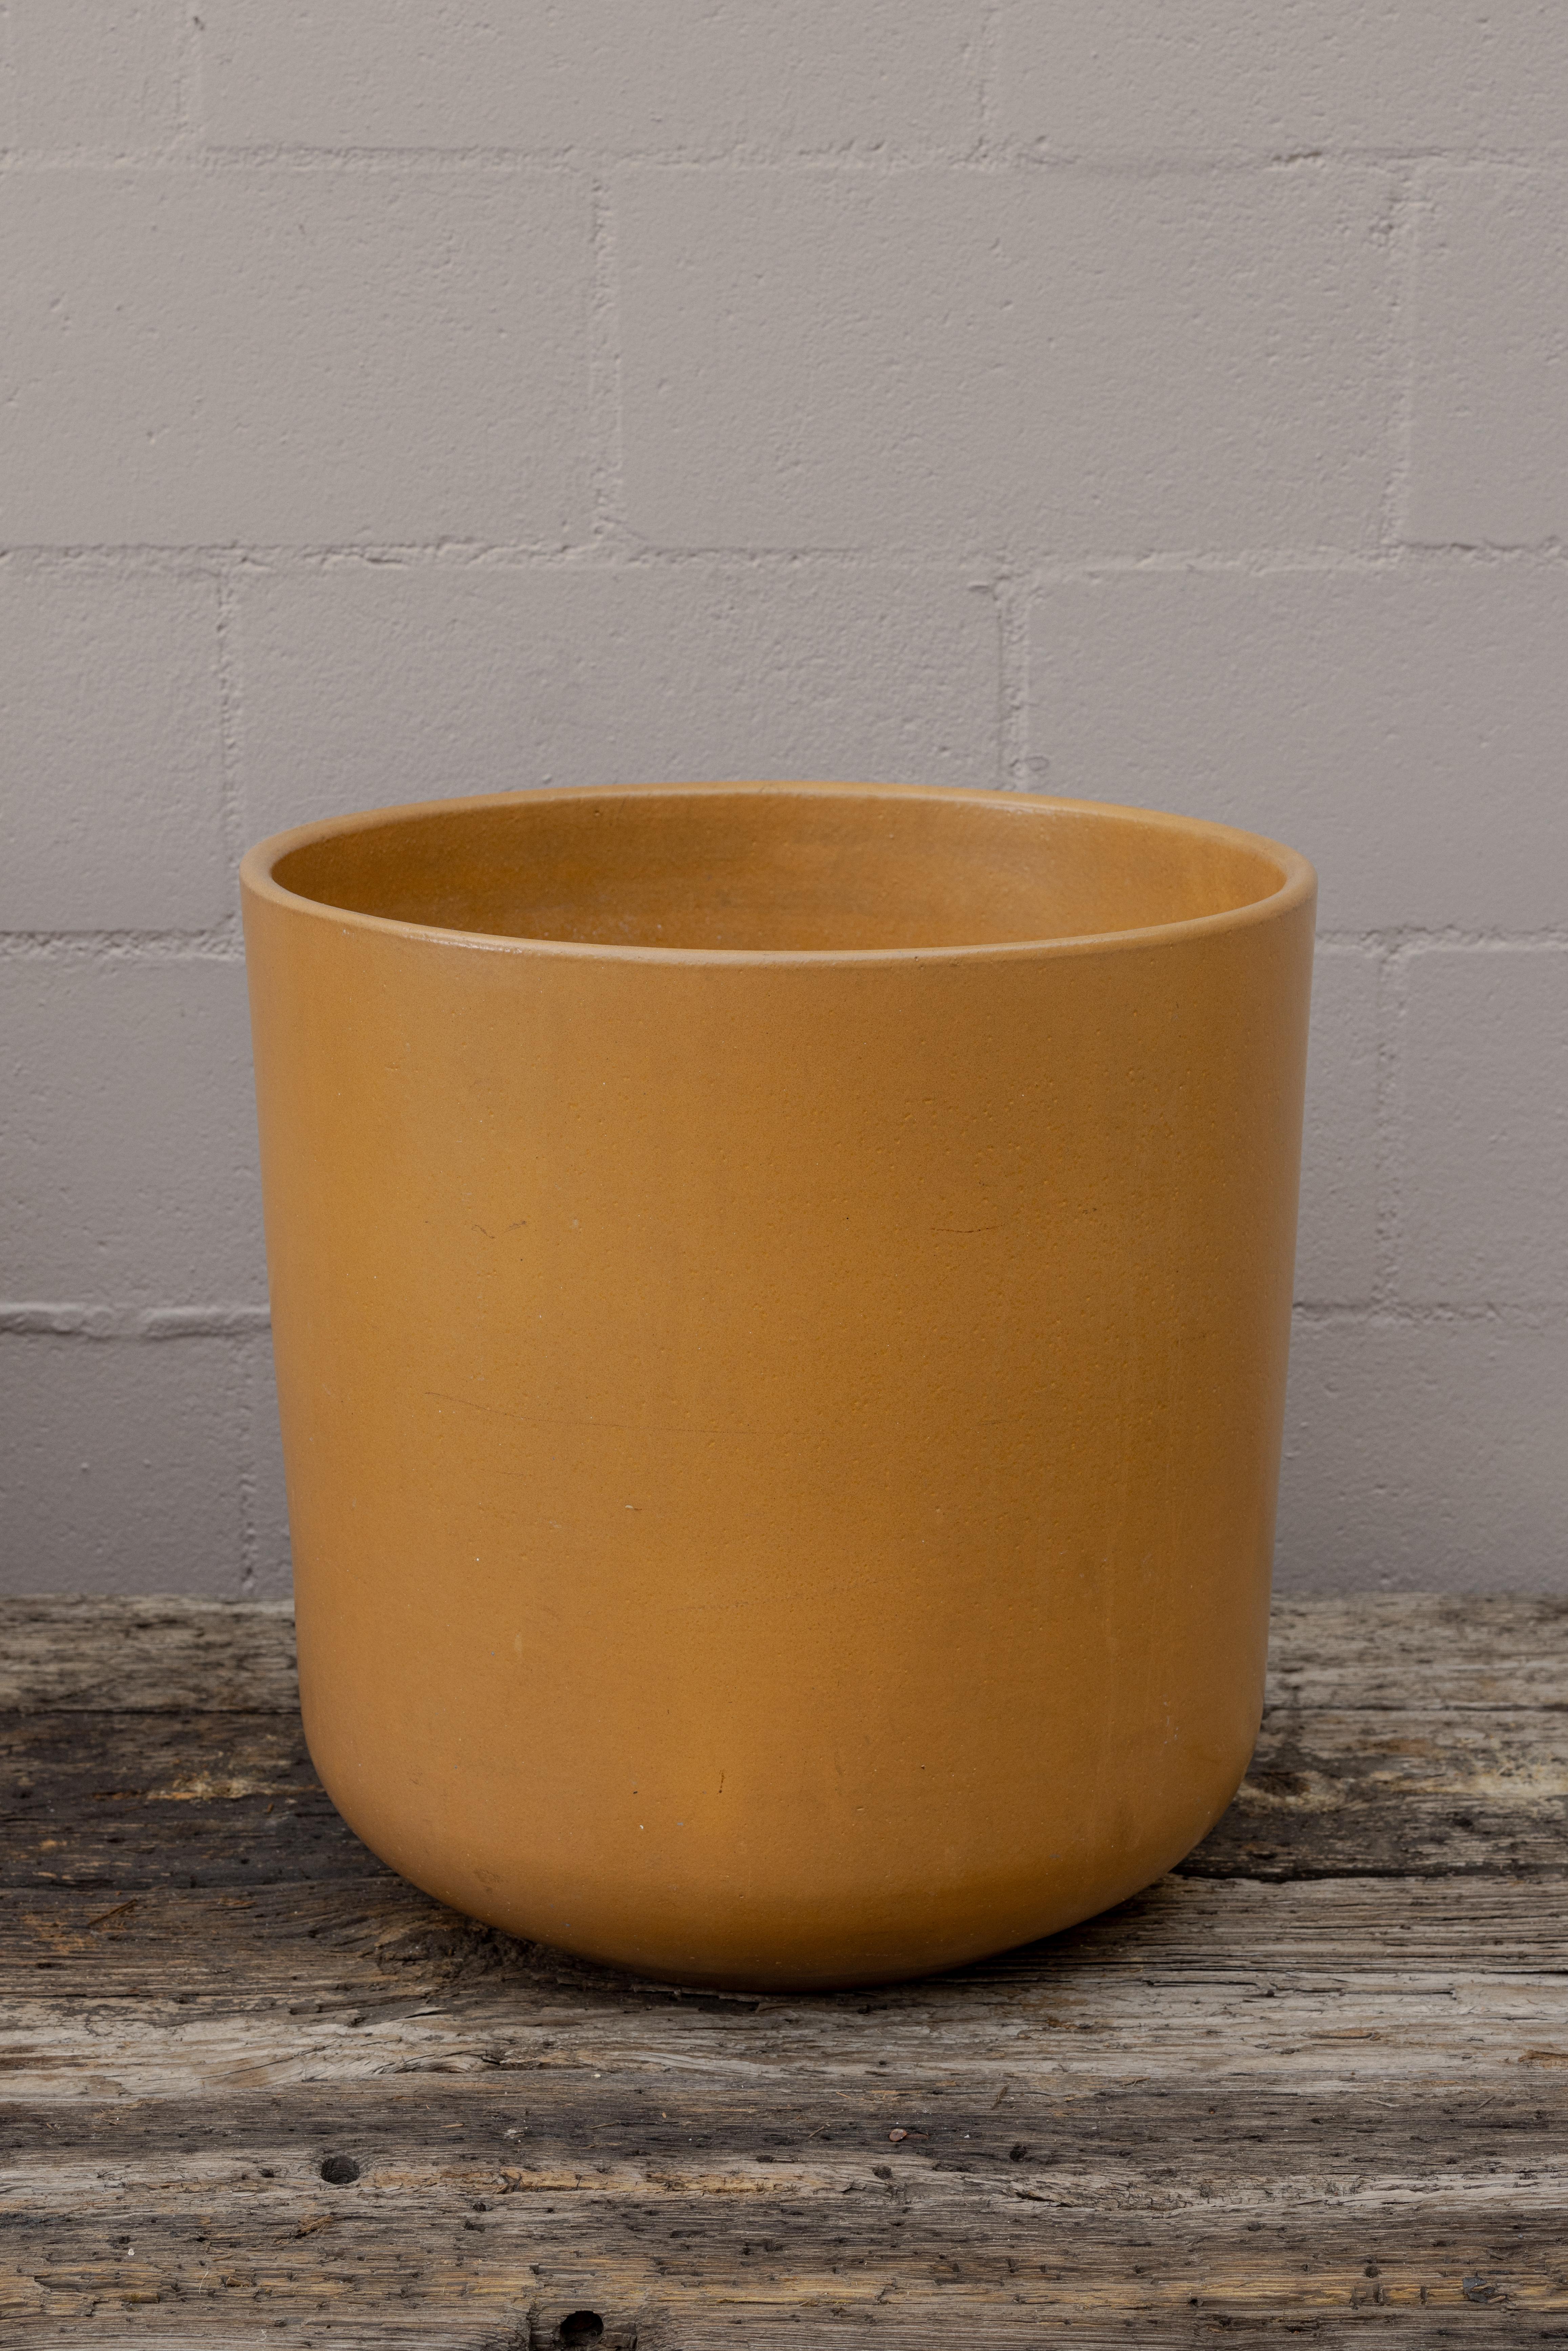 Model LT-15 Planters by Malcolm Leland for Architectural Pottery, Midcentury, USA

Glazed Golden Ochre

H 17.5